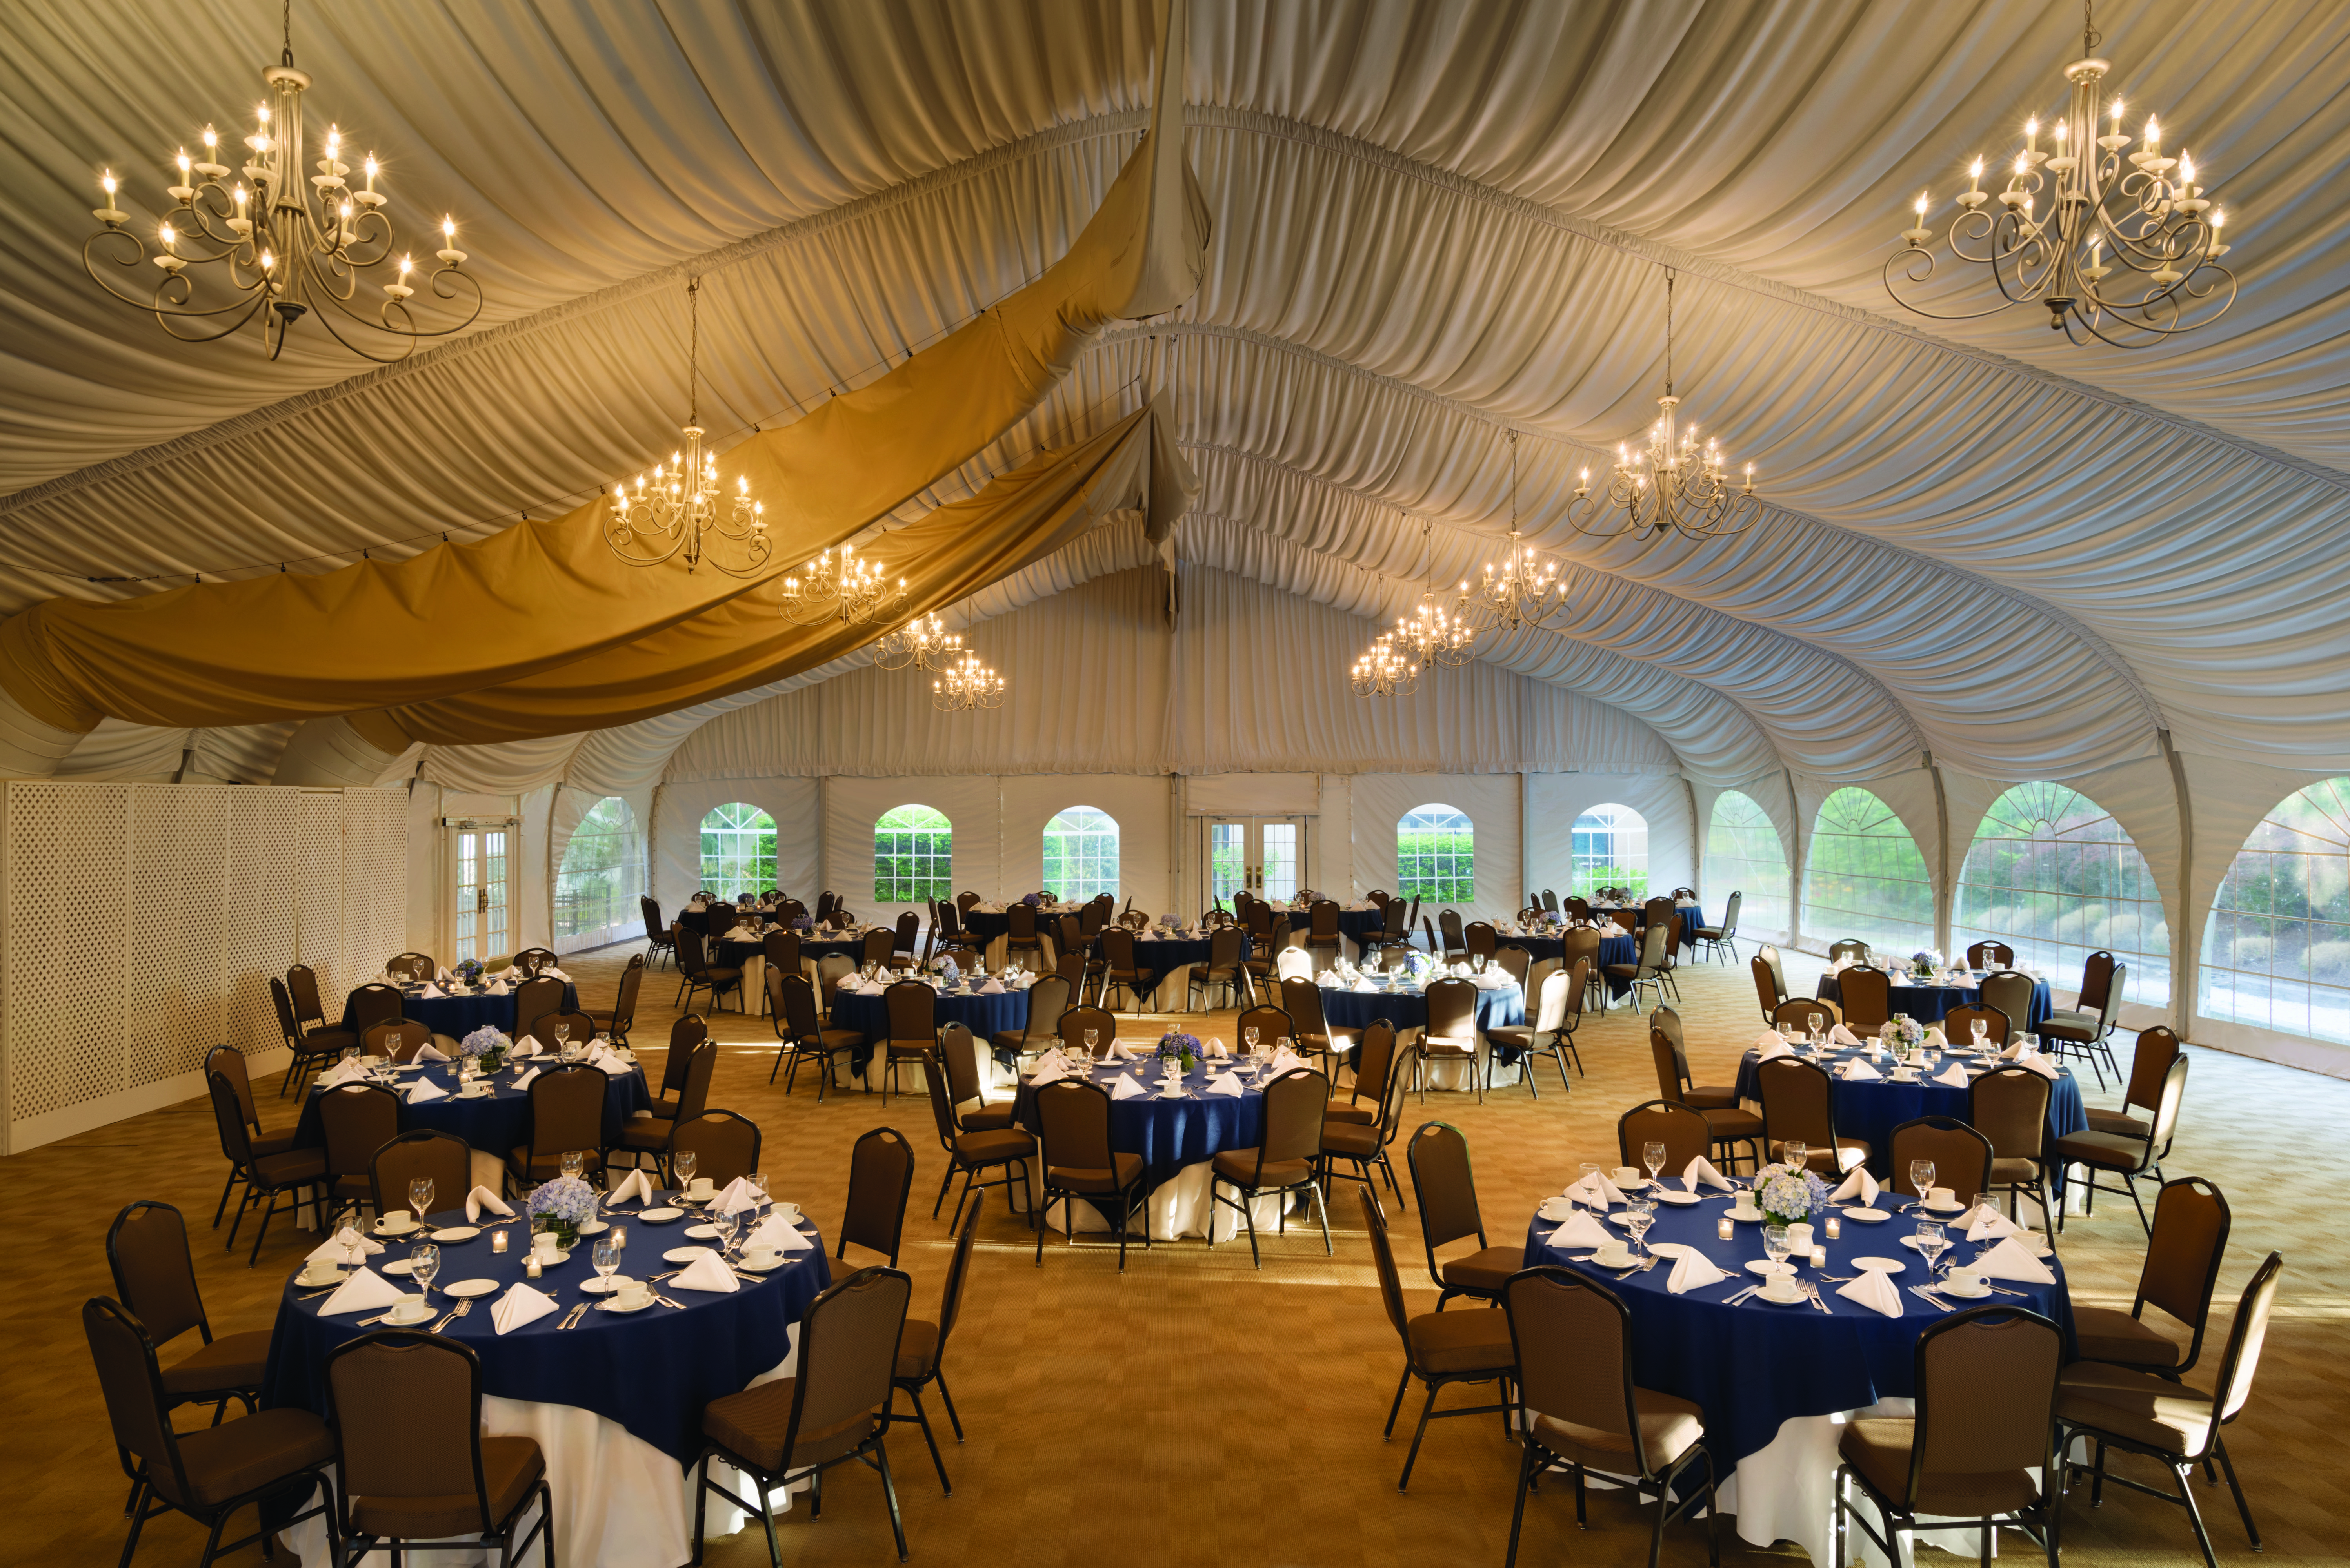 Pavilion with Round Tables and Chairs Setup for Event